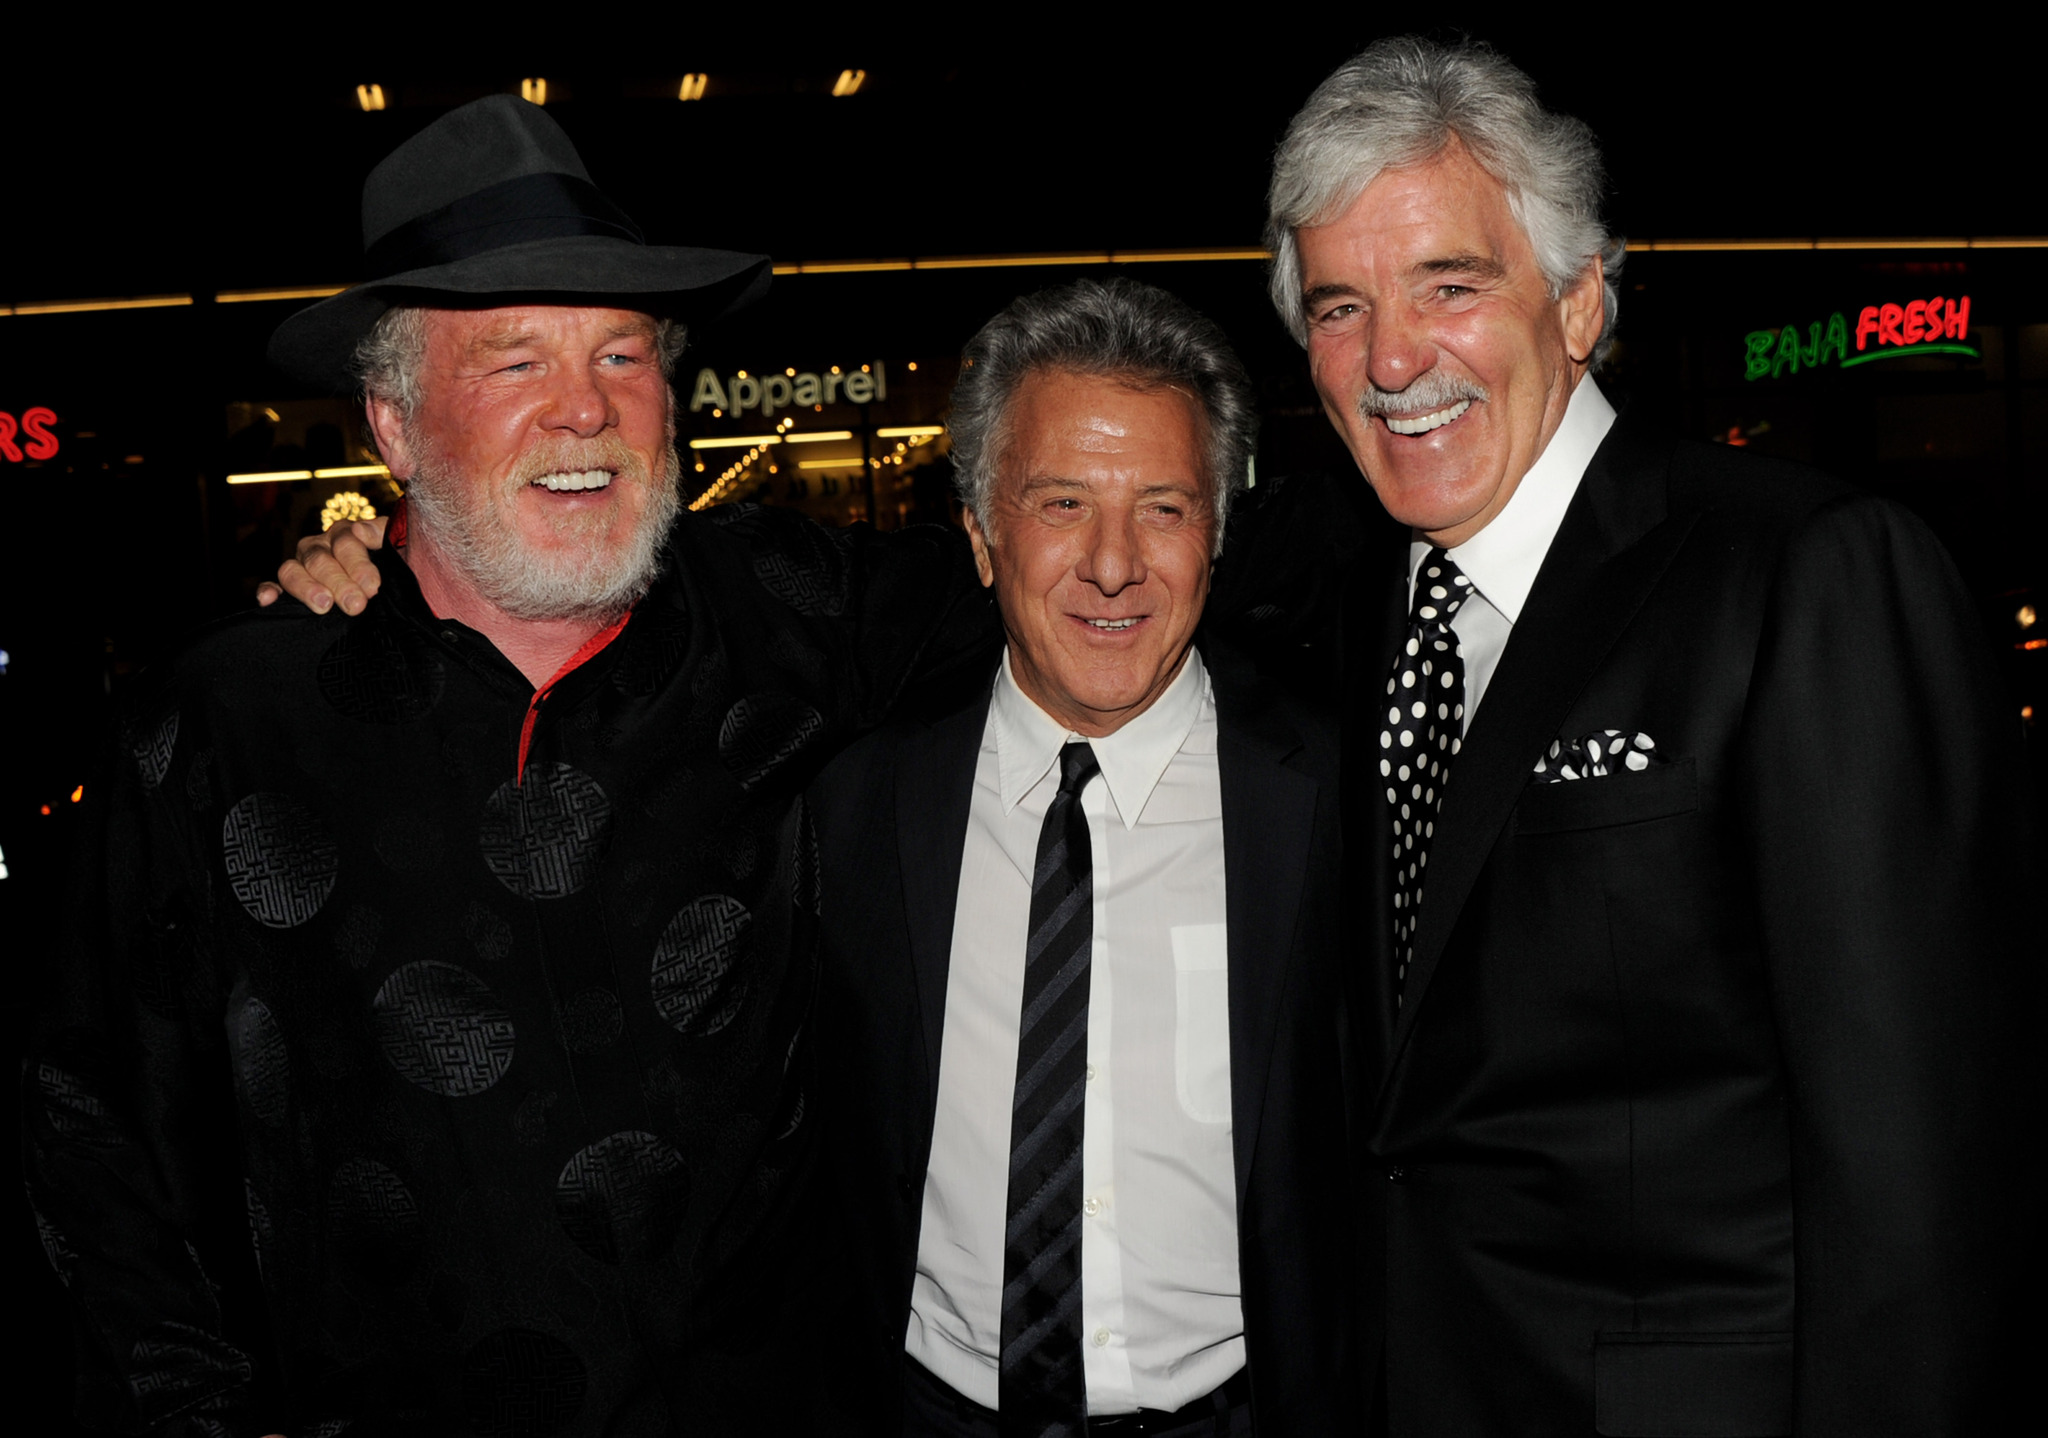 Dustin Hoffman, Nick Nolte and Dennis Farina at event of Luck (2011)